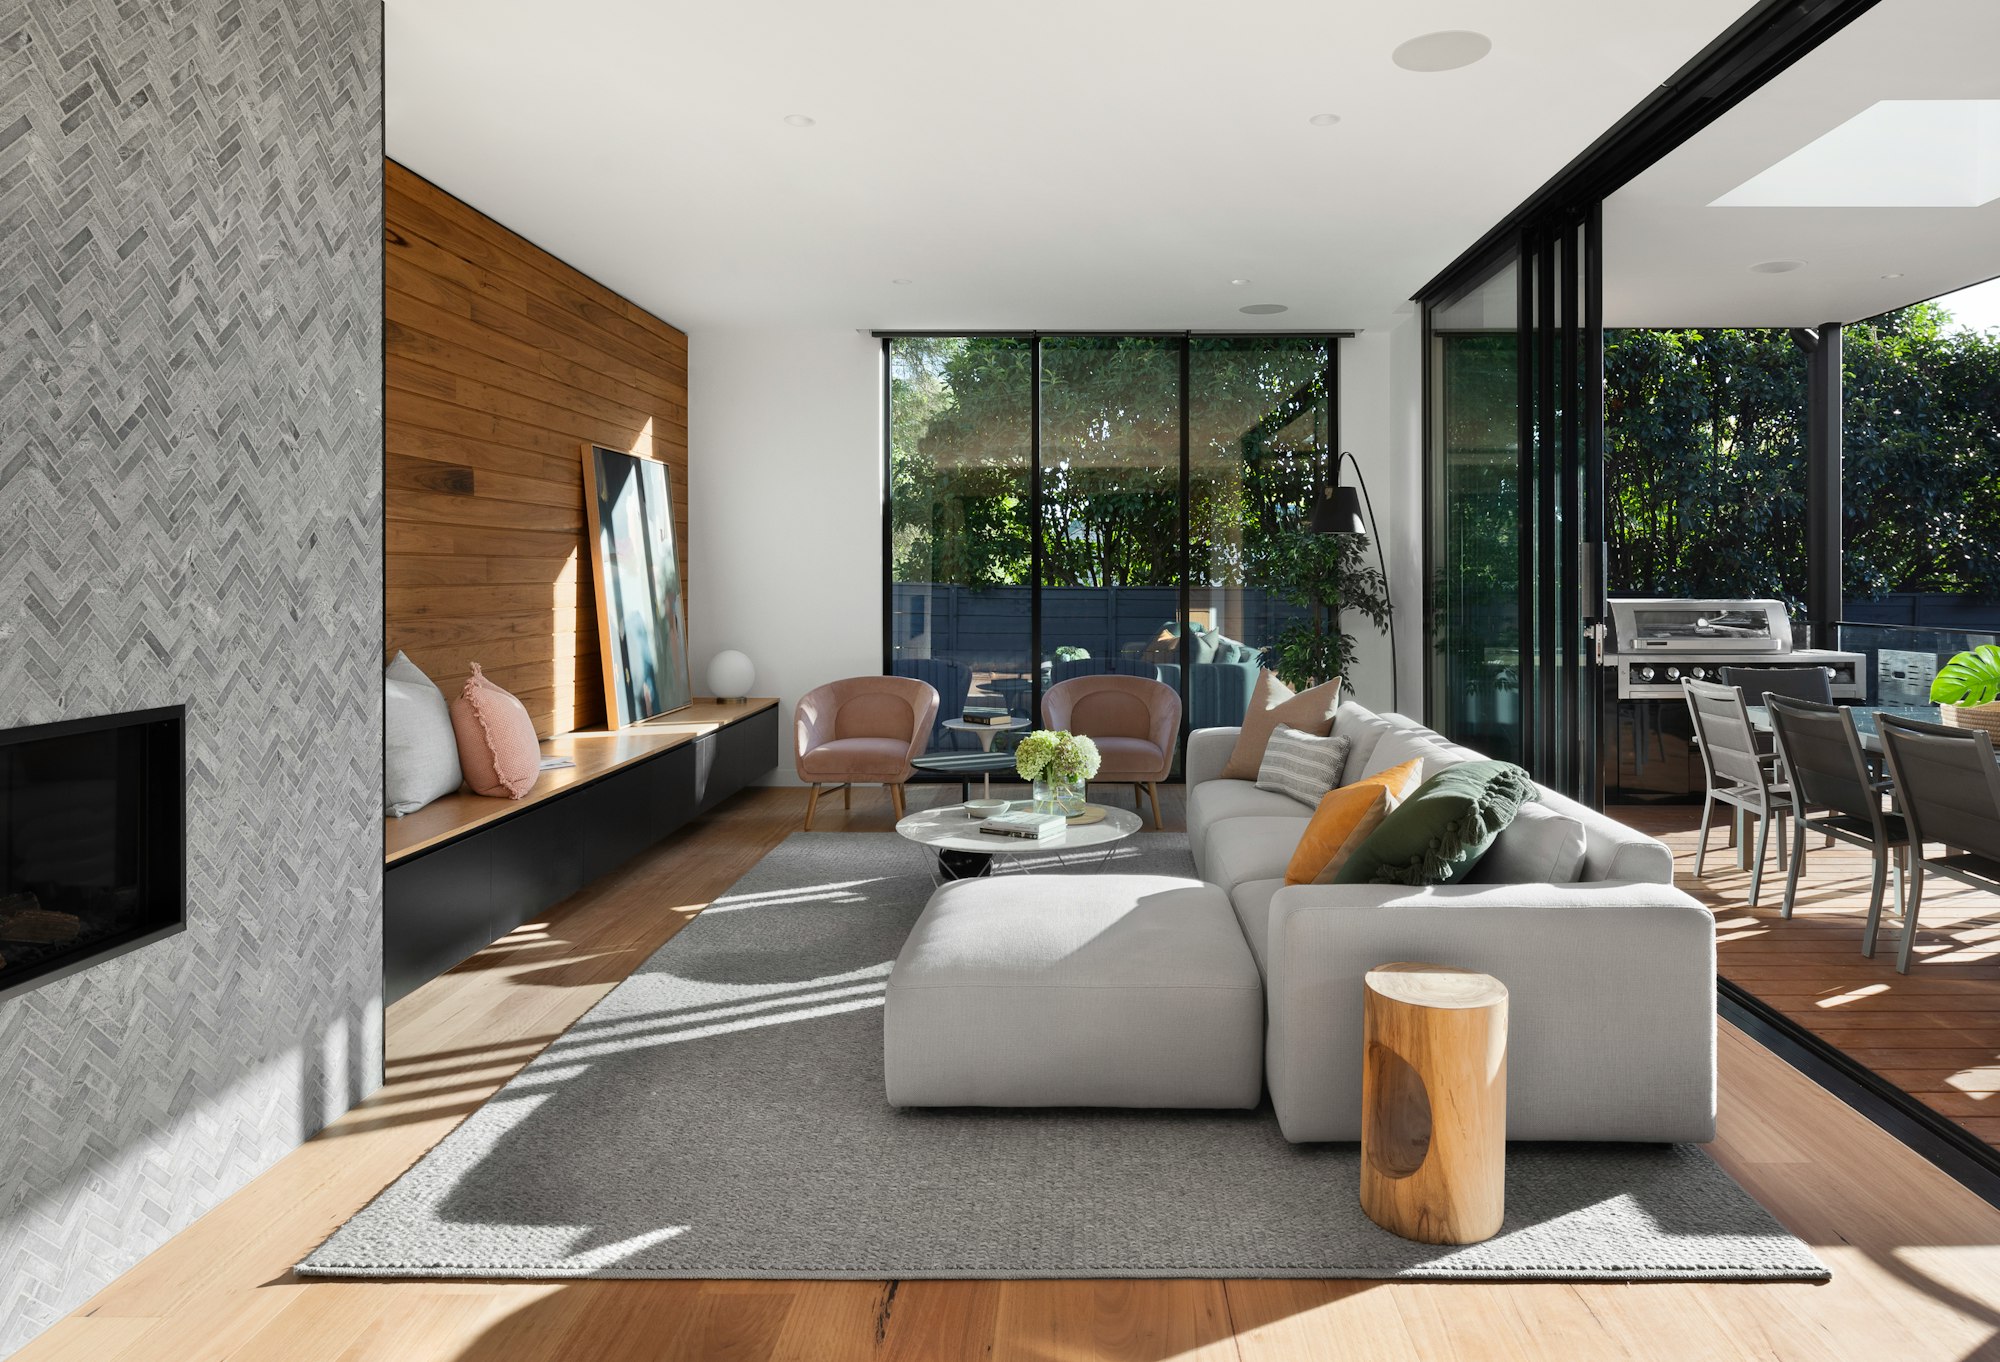 More info: https://www.rarchitecture.com.au/parkdale_house_balwyn<span class='notranslate'> </span>Photography: Dylan James - https://dylanjames.com.au/